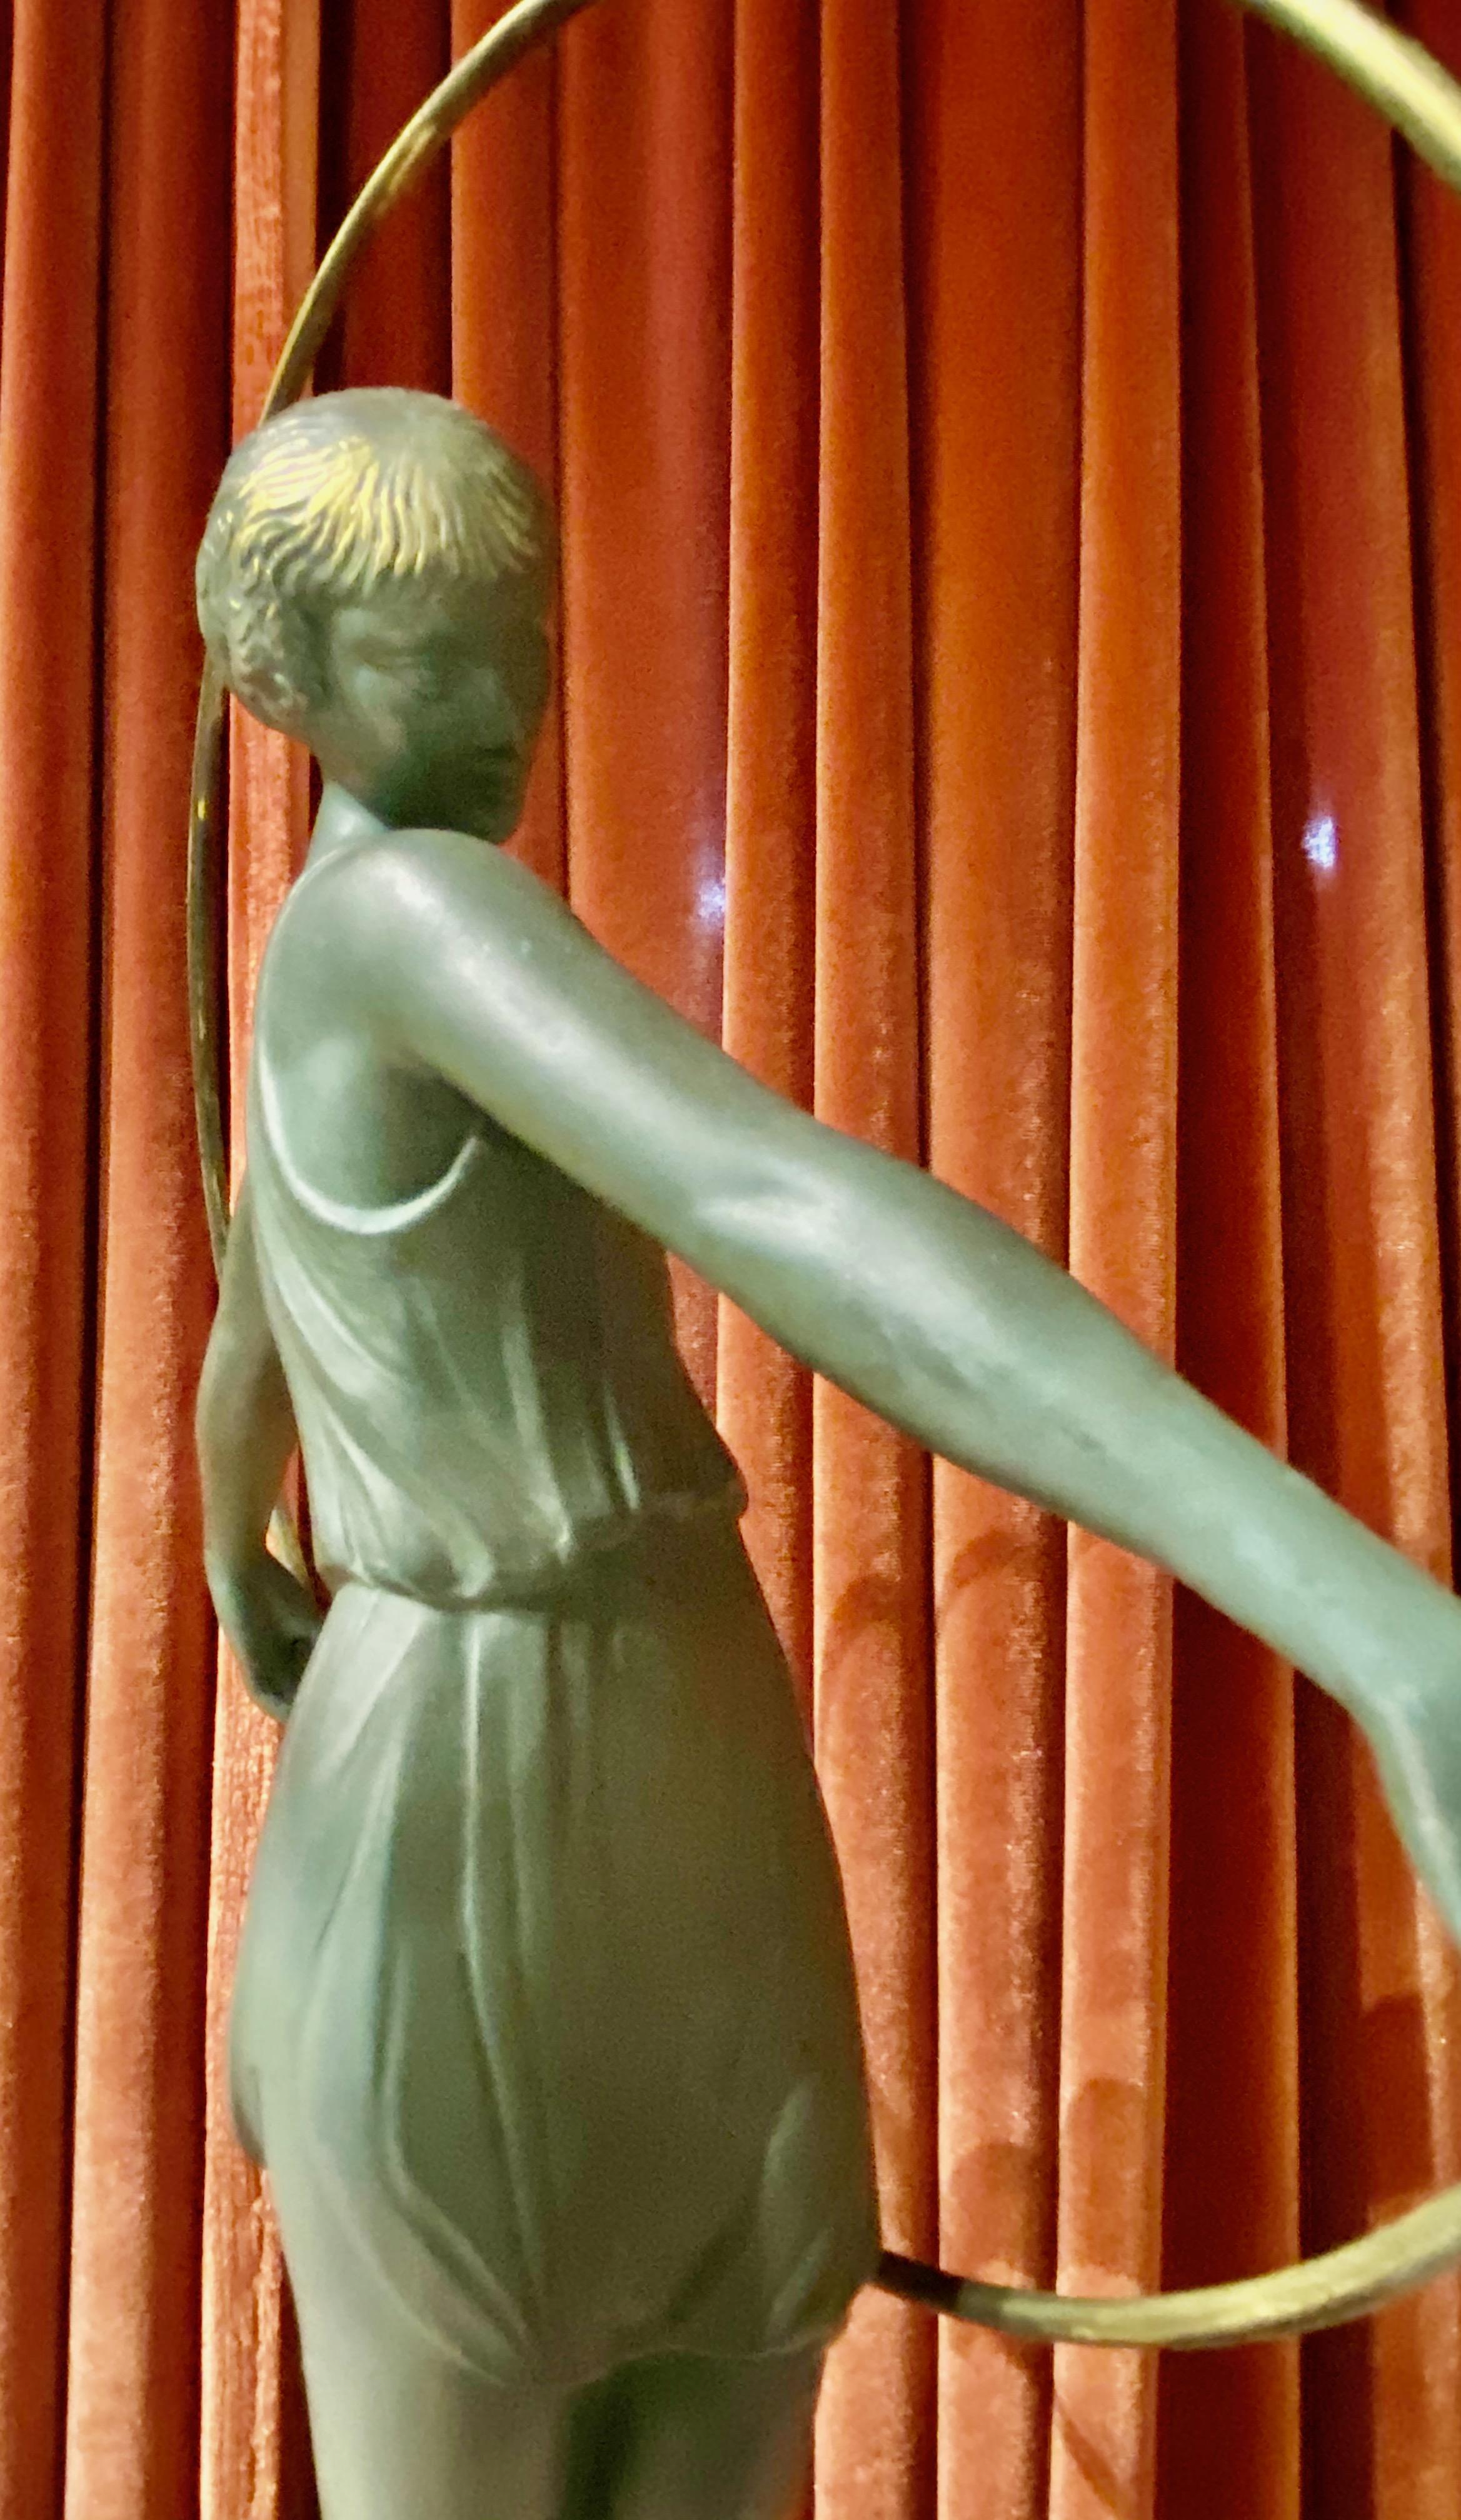 Mid-20th Century Pierre Le Faguays Dancer with Hoop Art Deco Green Patented Sculpture Fayral